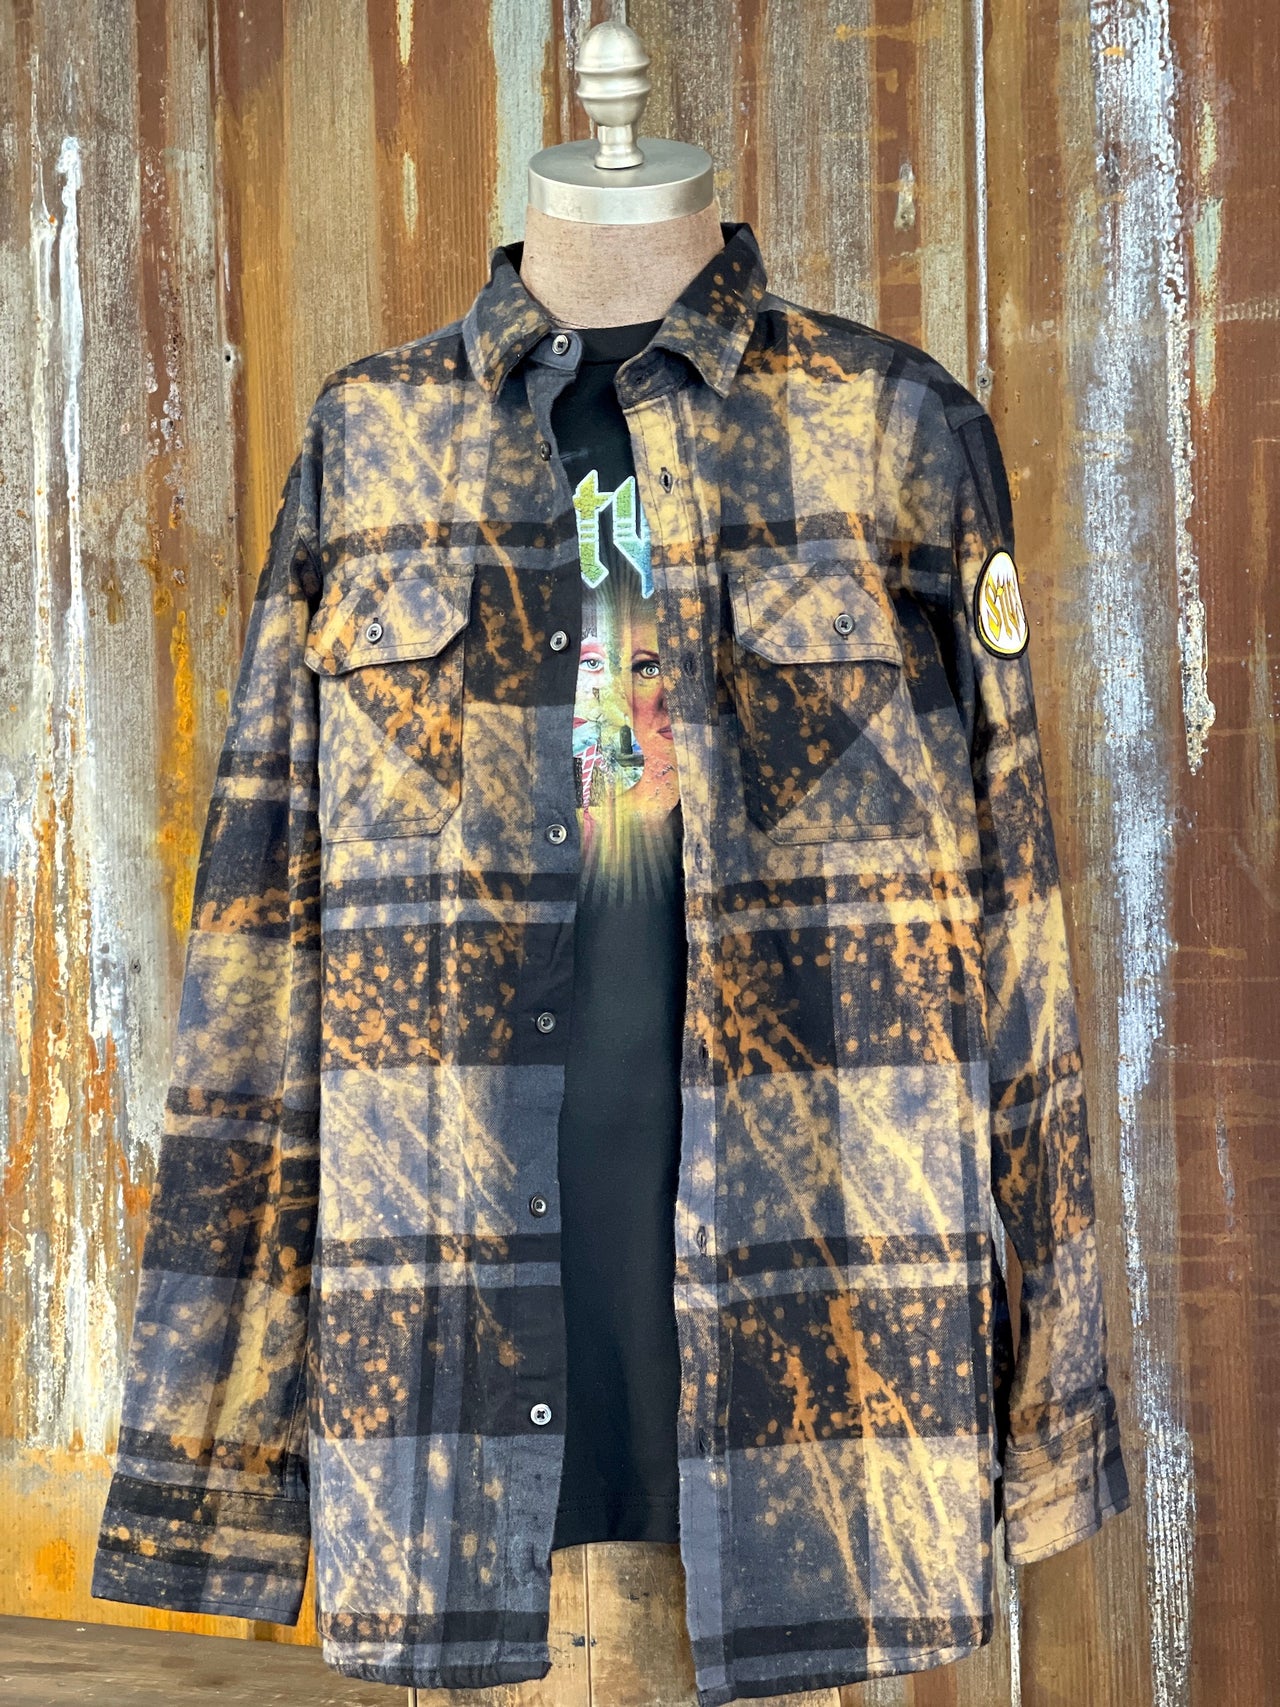 Styx River Art Flannel- Distressed Black CLEARANCE